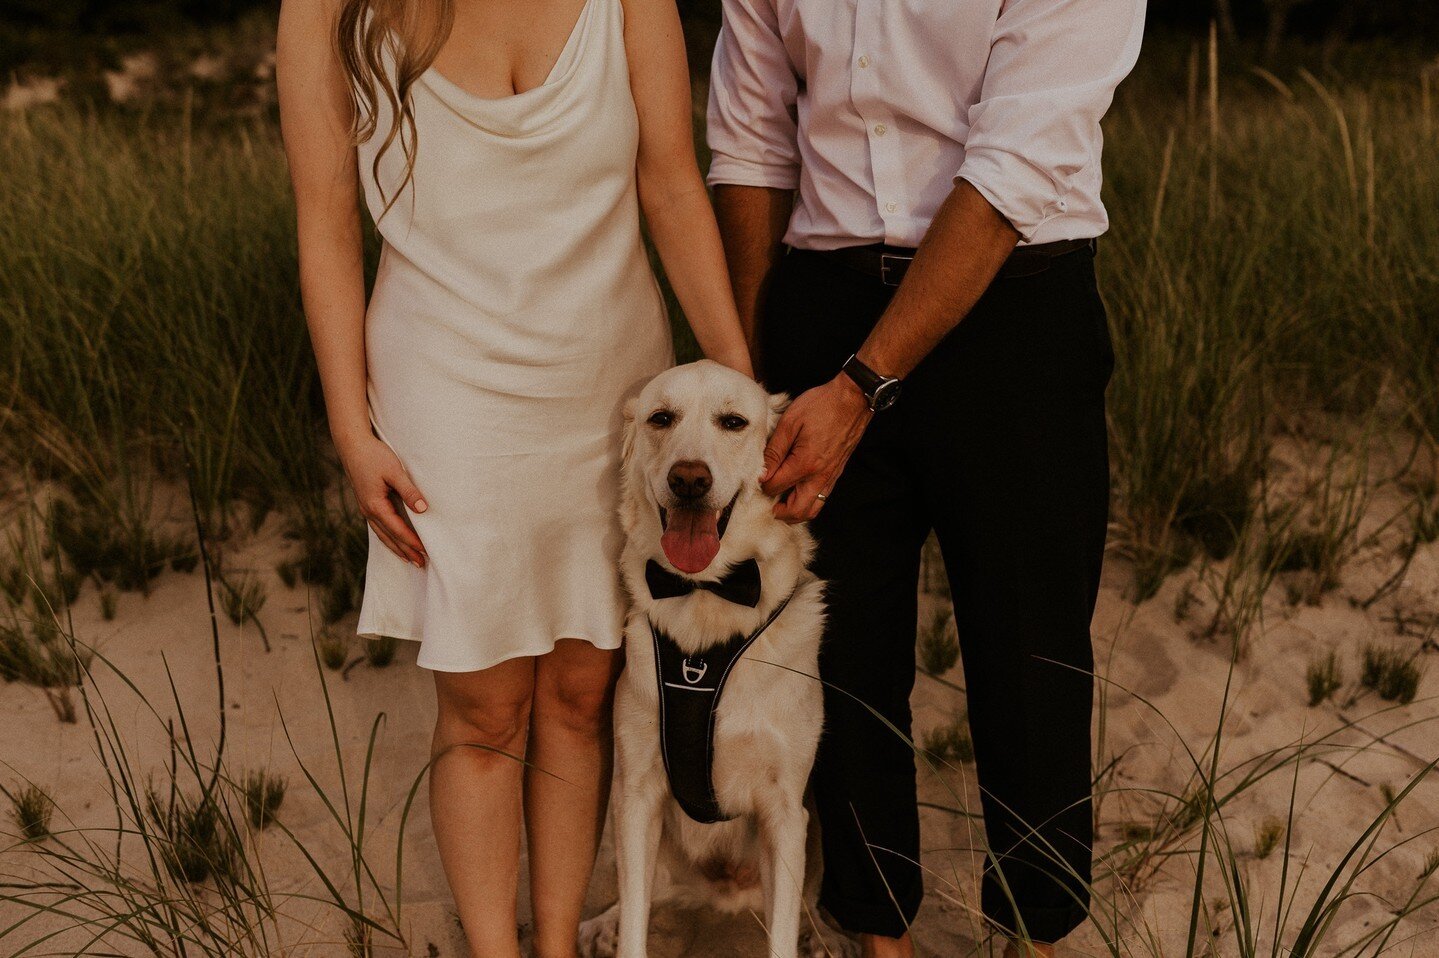 This week, I'm sharing how to include your dog in your elopement day, along with tips to make sure they are safe and comfortable. ⁠
⁠
If you decide to bring your dog(s) along on your elopement day, the first step is to check that dogs are allowed in 